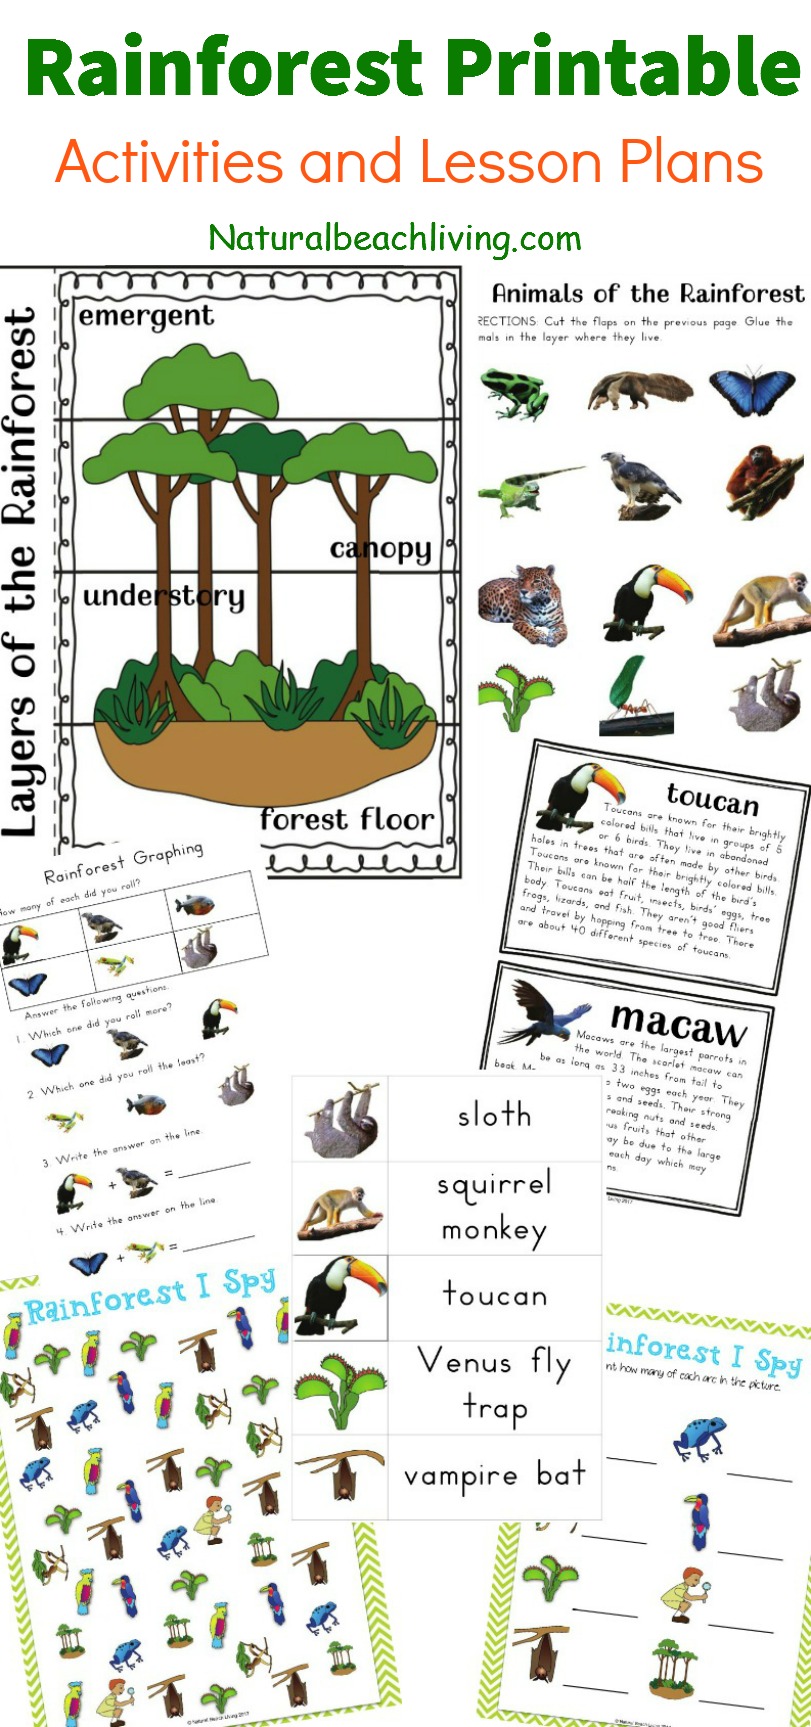 The Best Rainforest Printable Activities for Kids